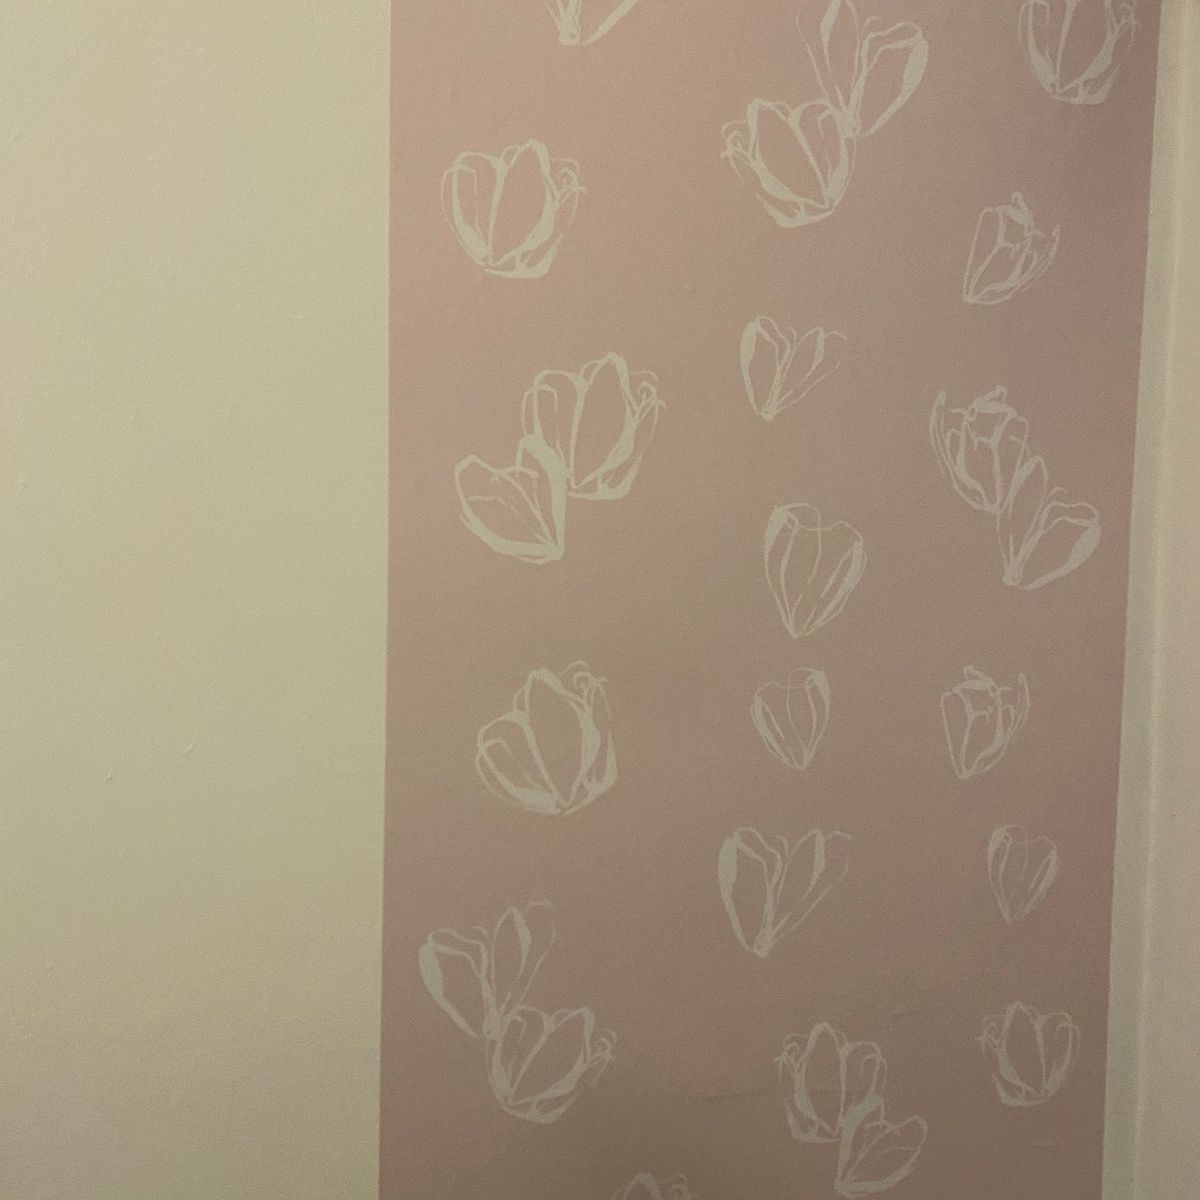 Before and After Peel and Stick Wallpaper